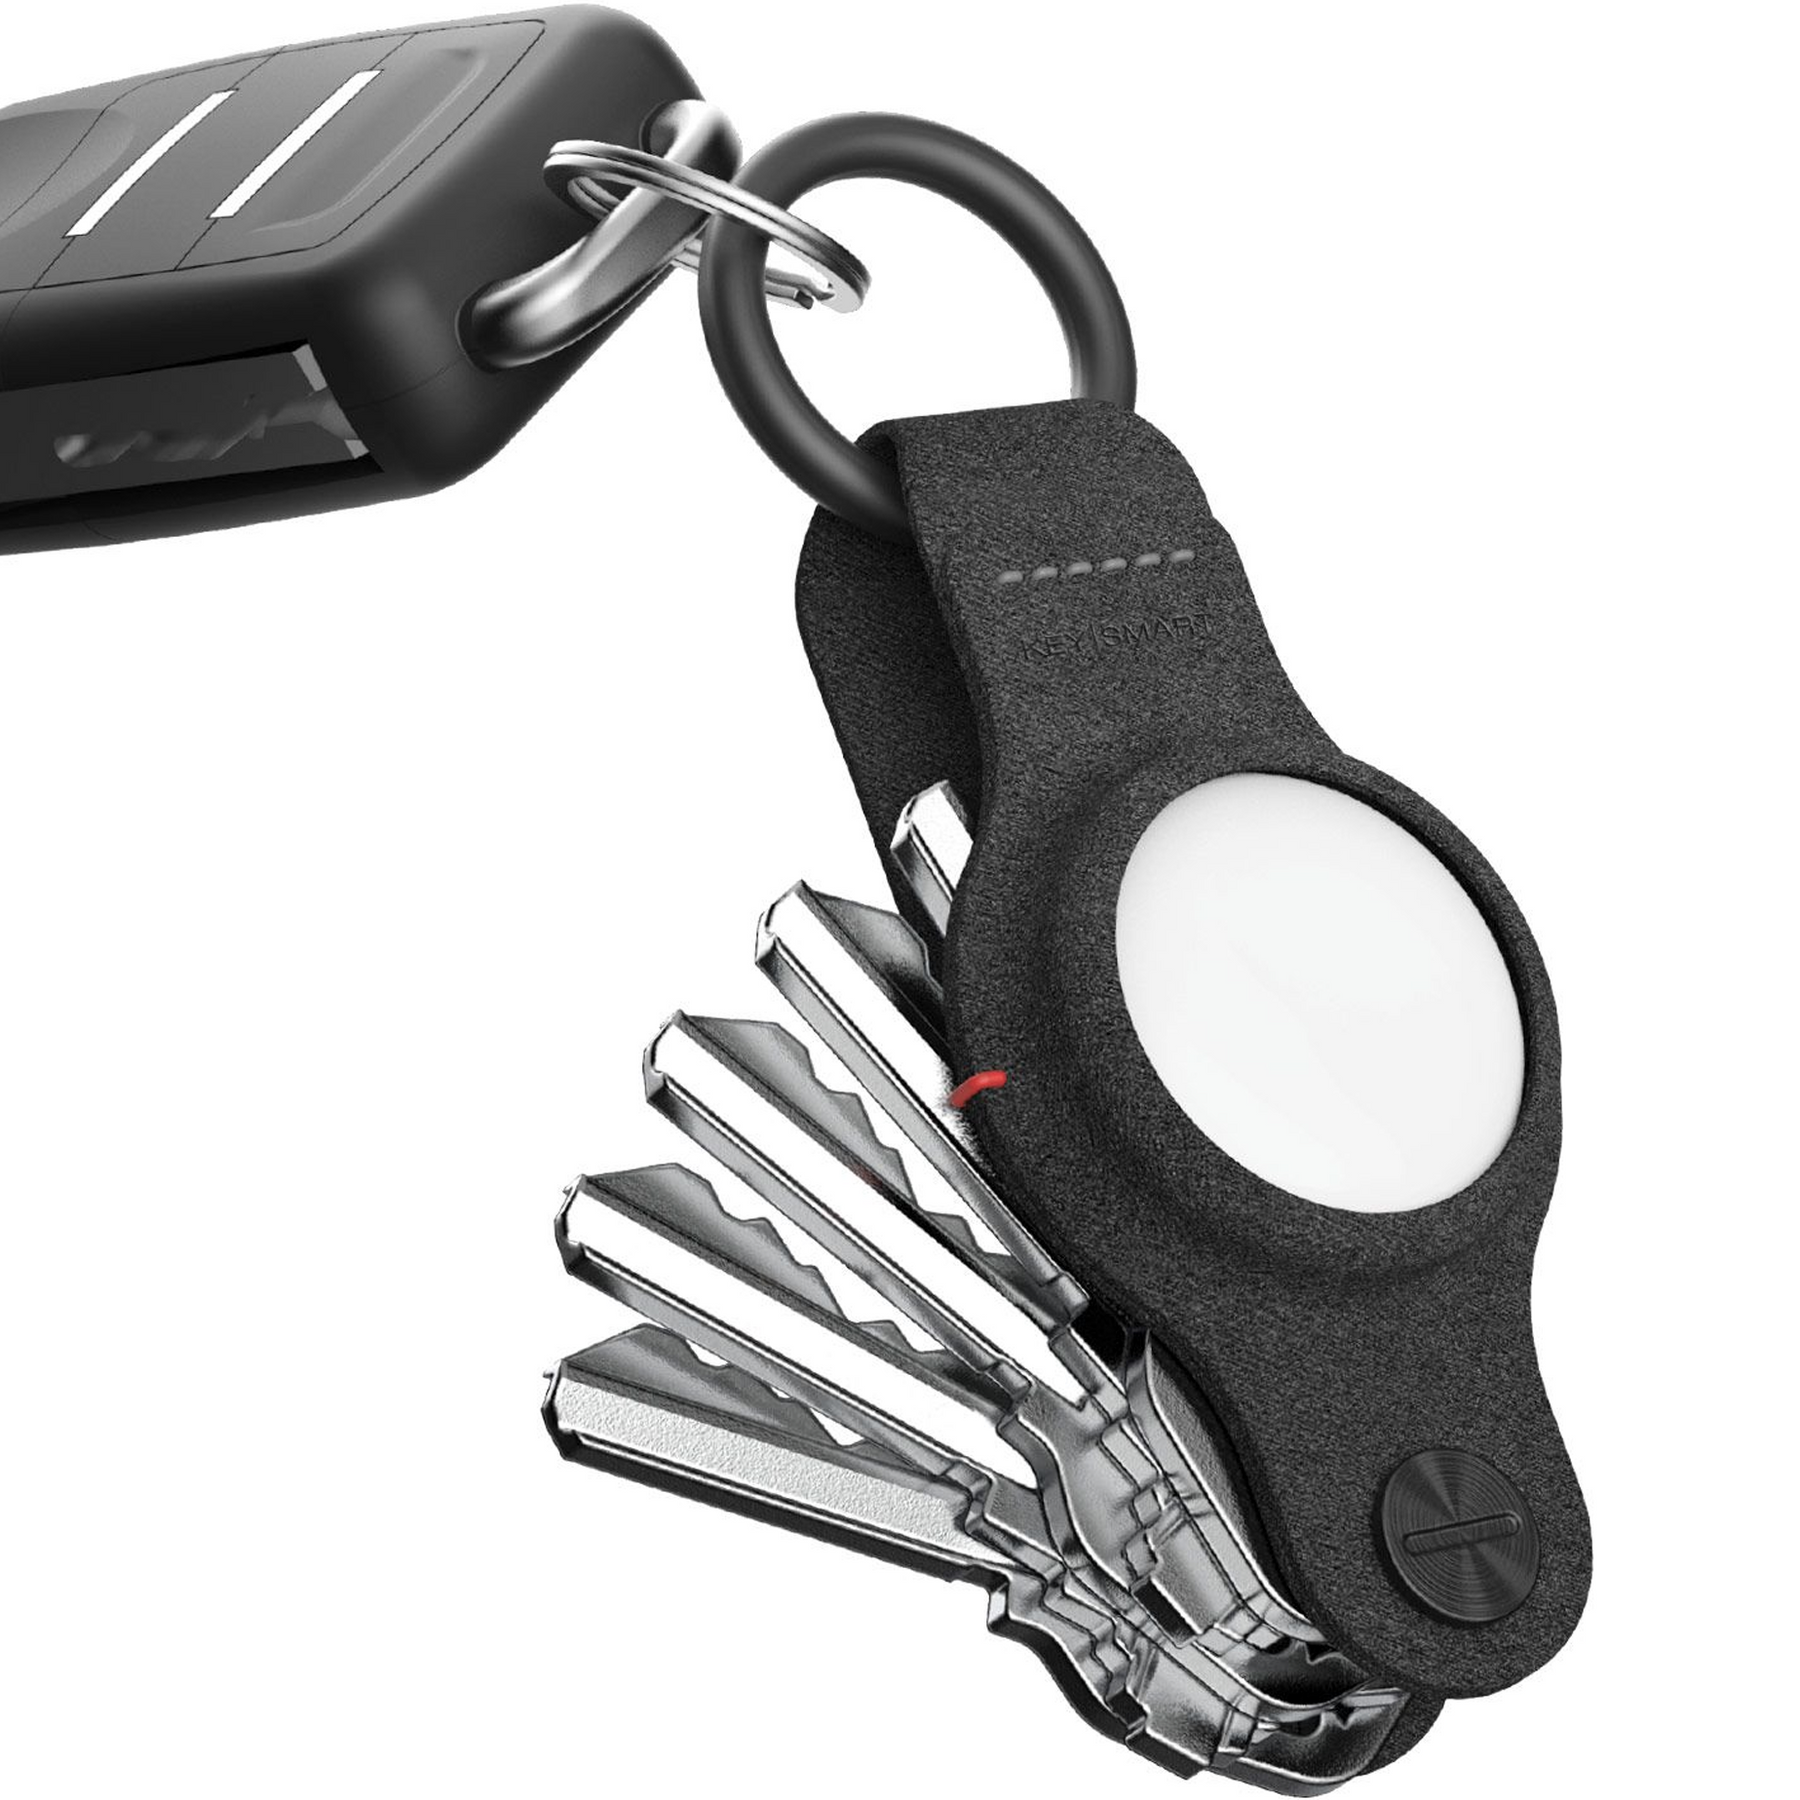 KeySmart Air Compact 2-in-1 AirTag and Key Holder at Swiss Knife Shop